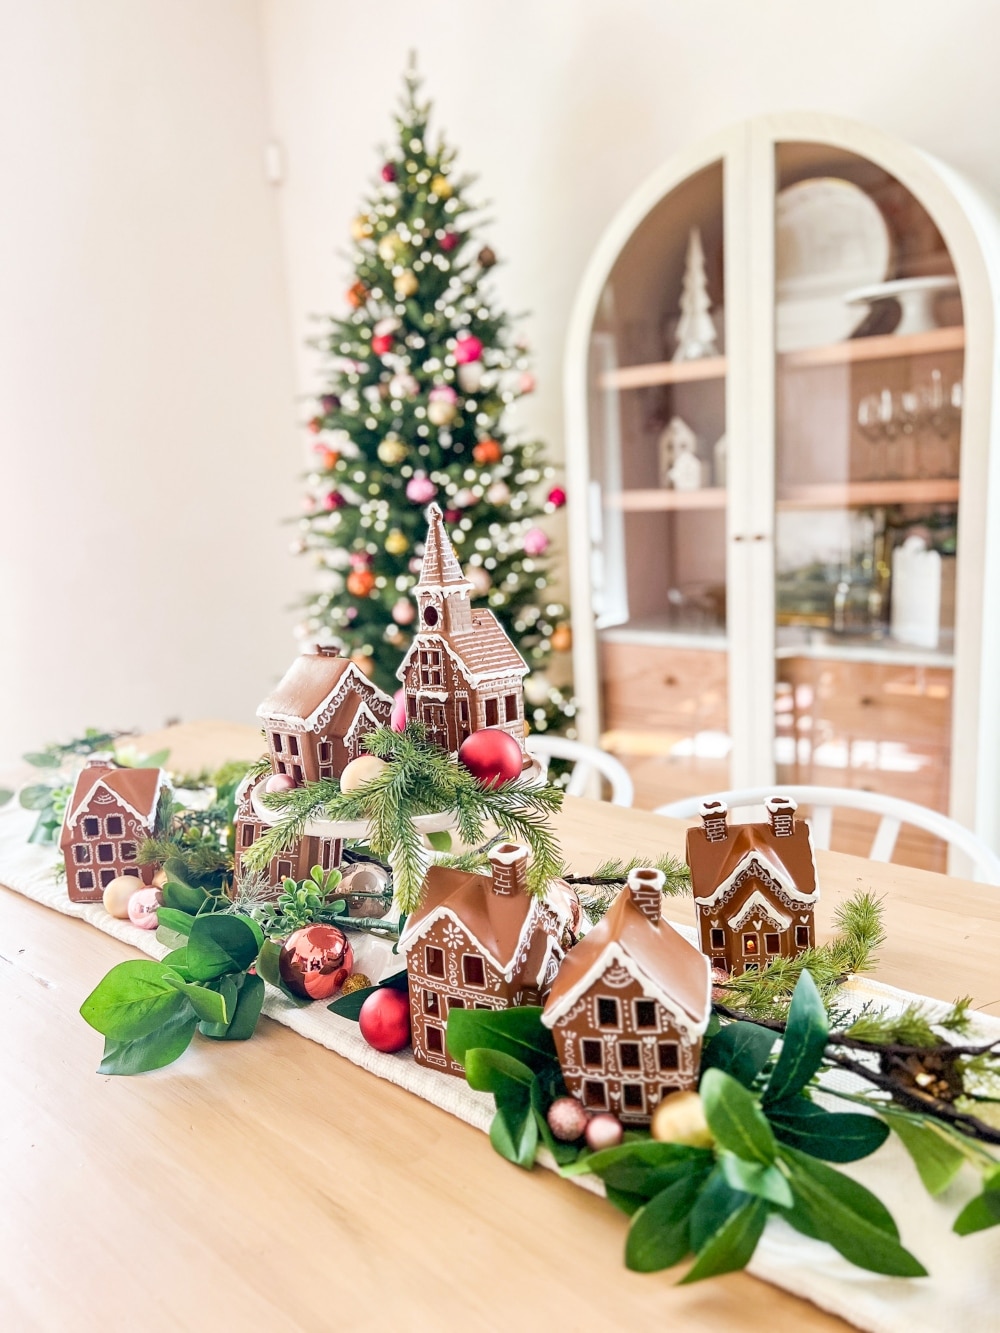 Turn a Ceramic Village into a Gingerbread Village. Revamp a plain ceramic Christmas village into a festive delight using spray paint, a white paint pen, and puffy paint. 